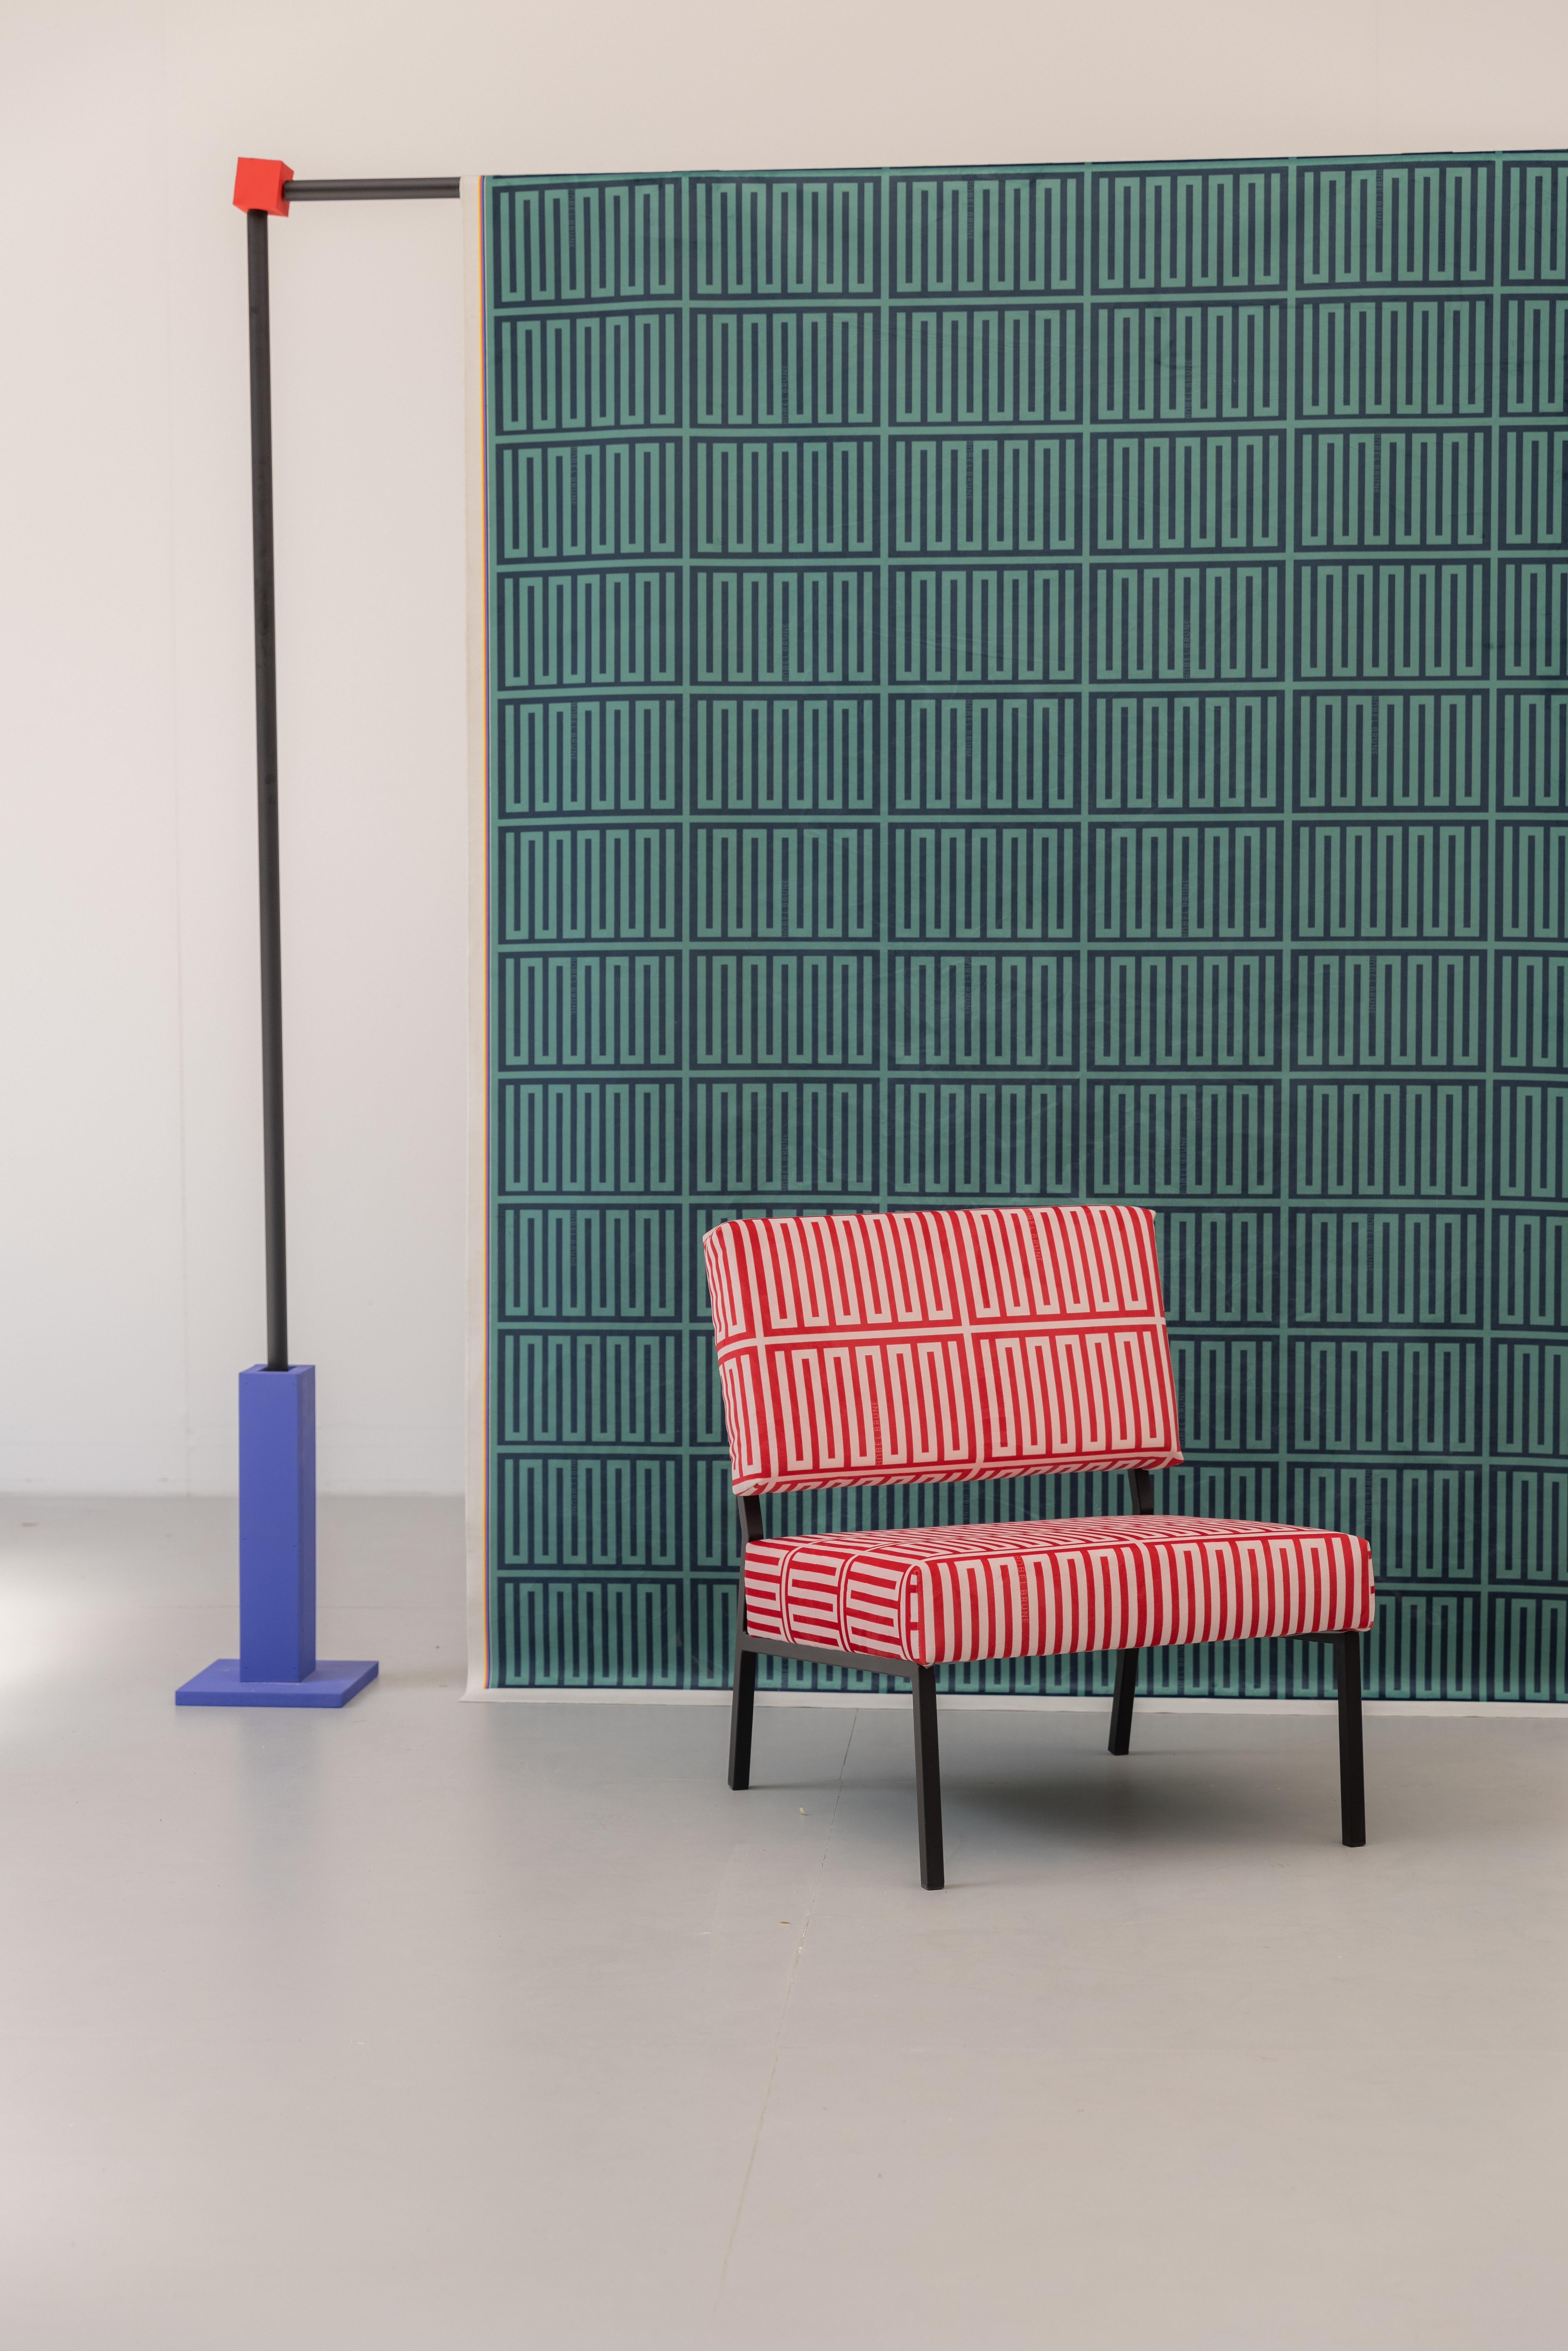 Elios red and pink O2 armchair by Babel Brune
Dimensions: D 63 x W 54 x H 67 cm, Seat H 35 cm.
Material: Suede velvet 380g / m², steel.

The O2 Elios armchair from Eté 83 collection offers you a rich texture and deep colors thanks to our now